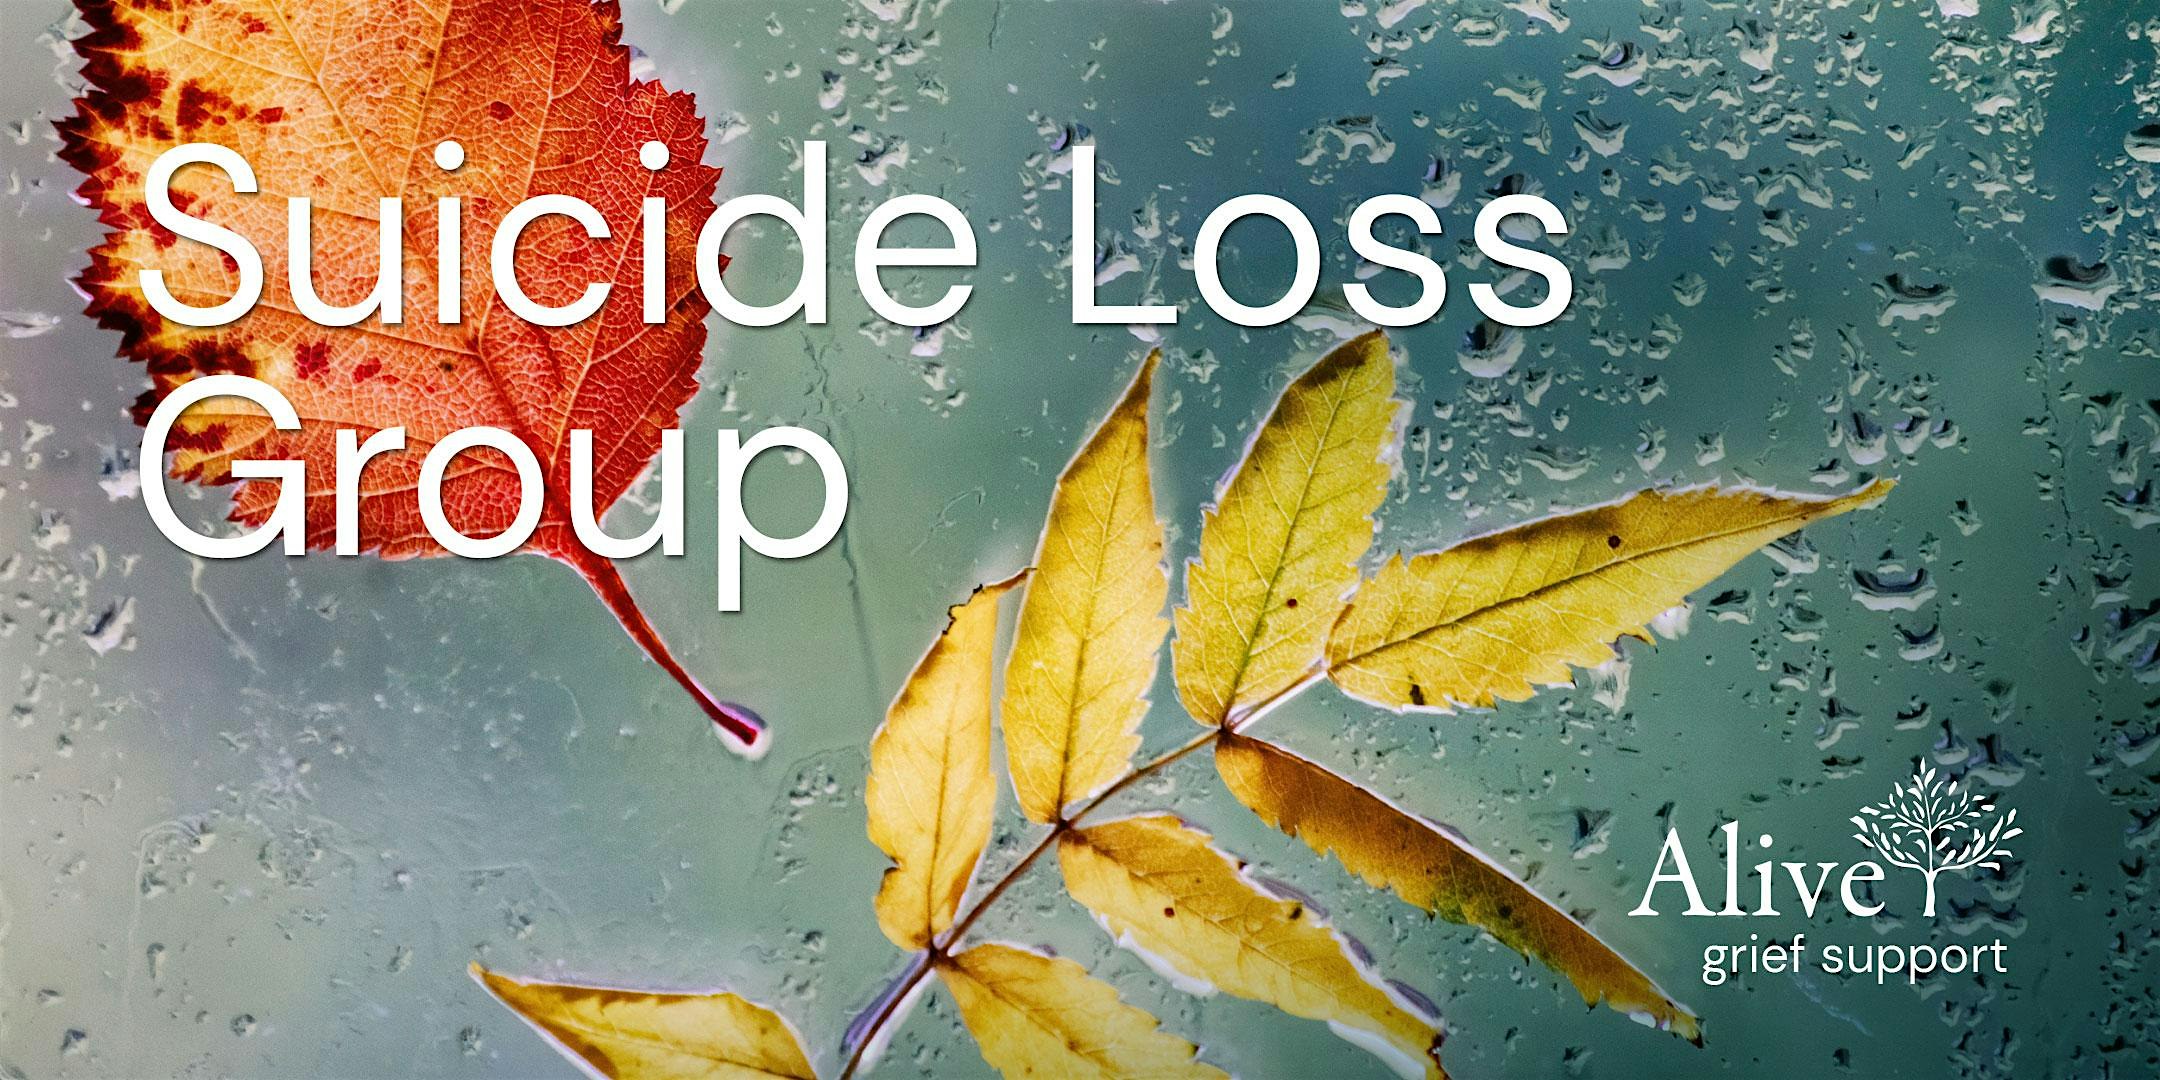 Suicide Loss Group